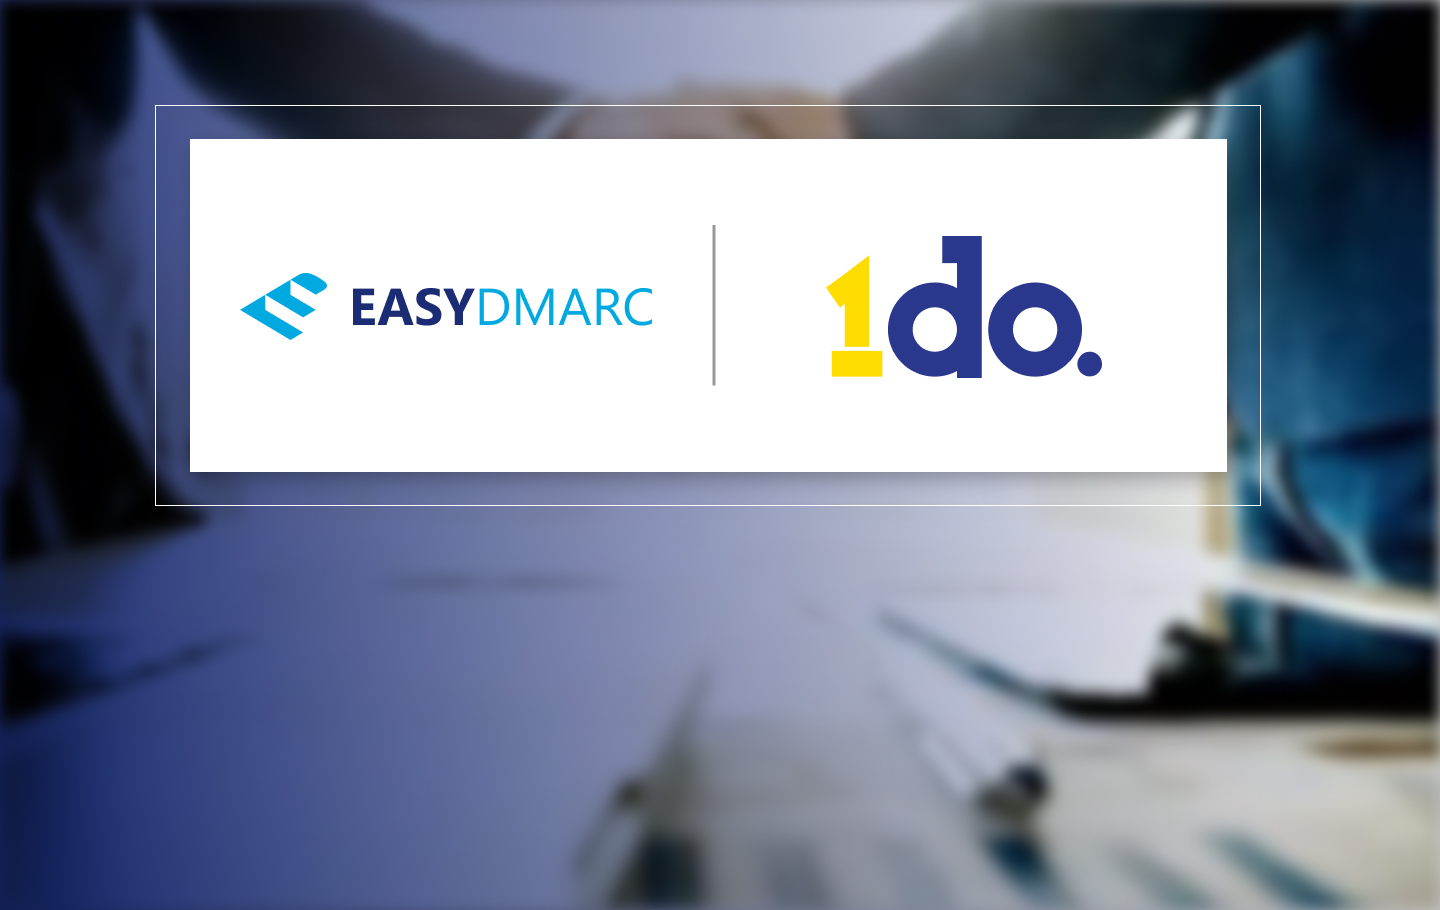 The logos of EasyDMARC and 1do on a blue background.